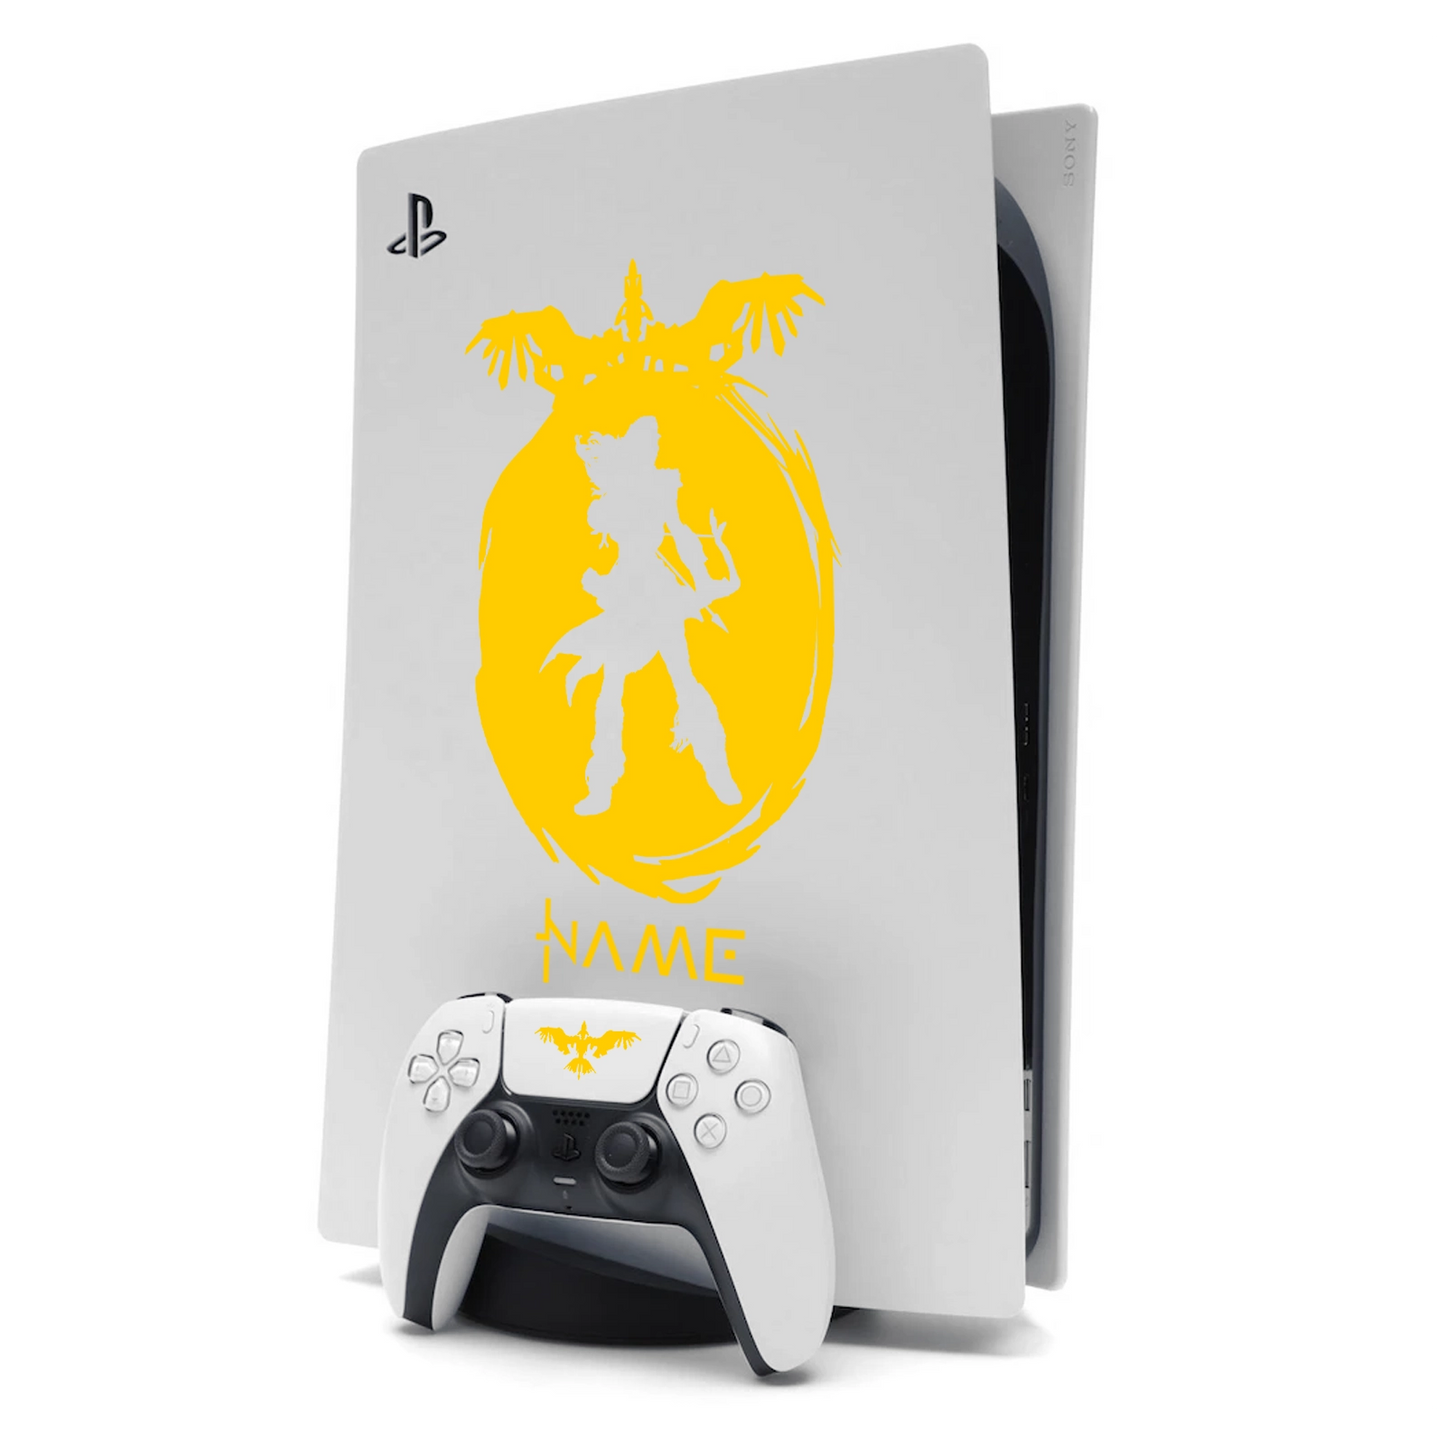 Horizon Aloy PS5 Sticker Skin for Playstation 5 in Yellow